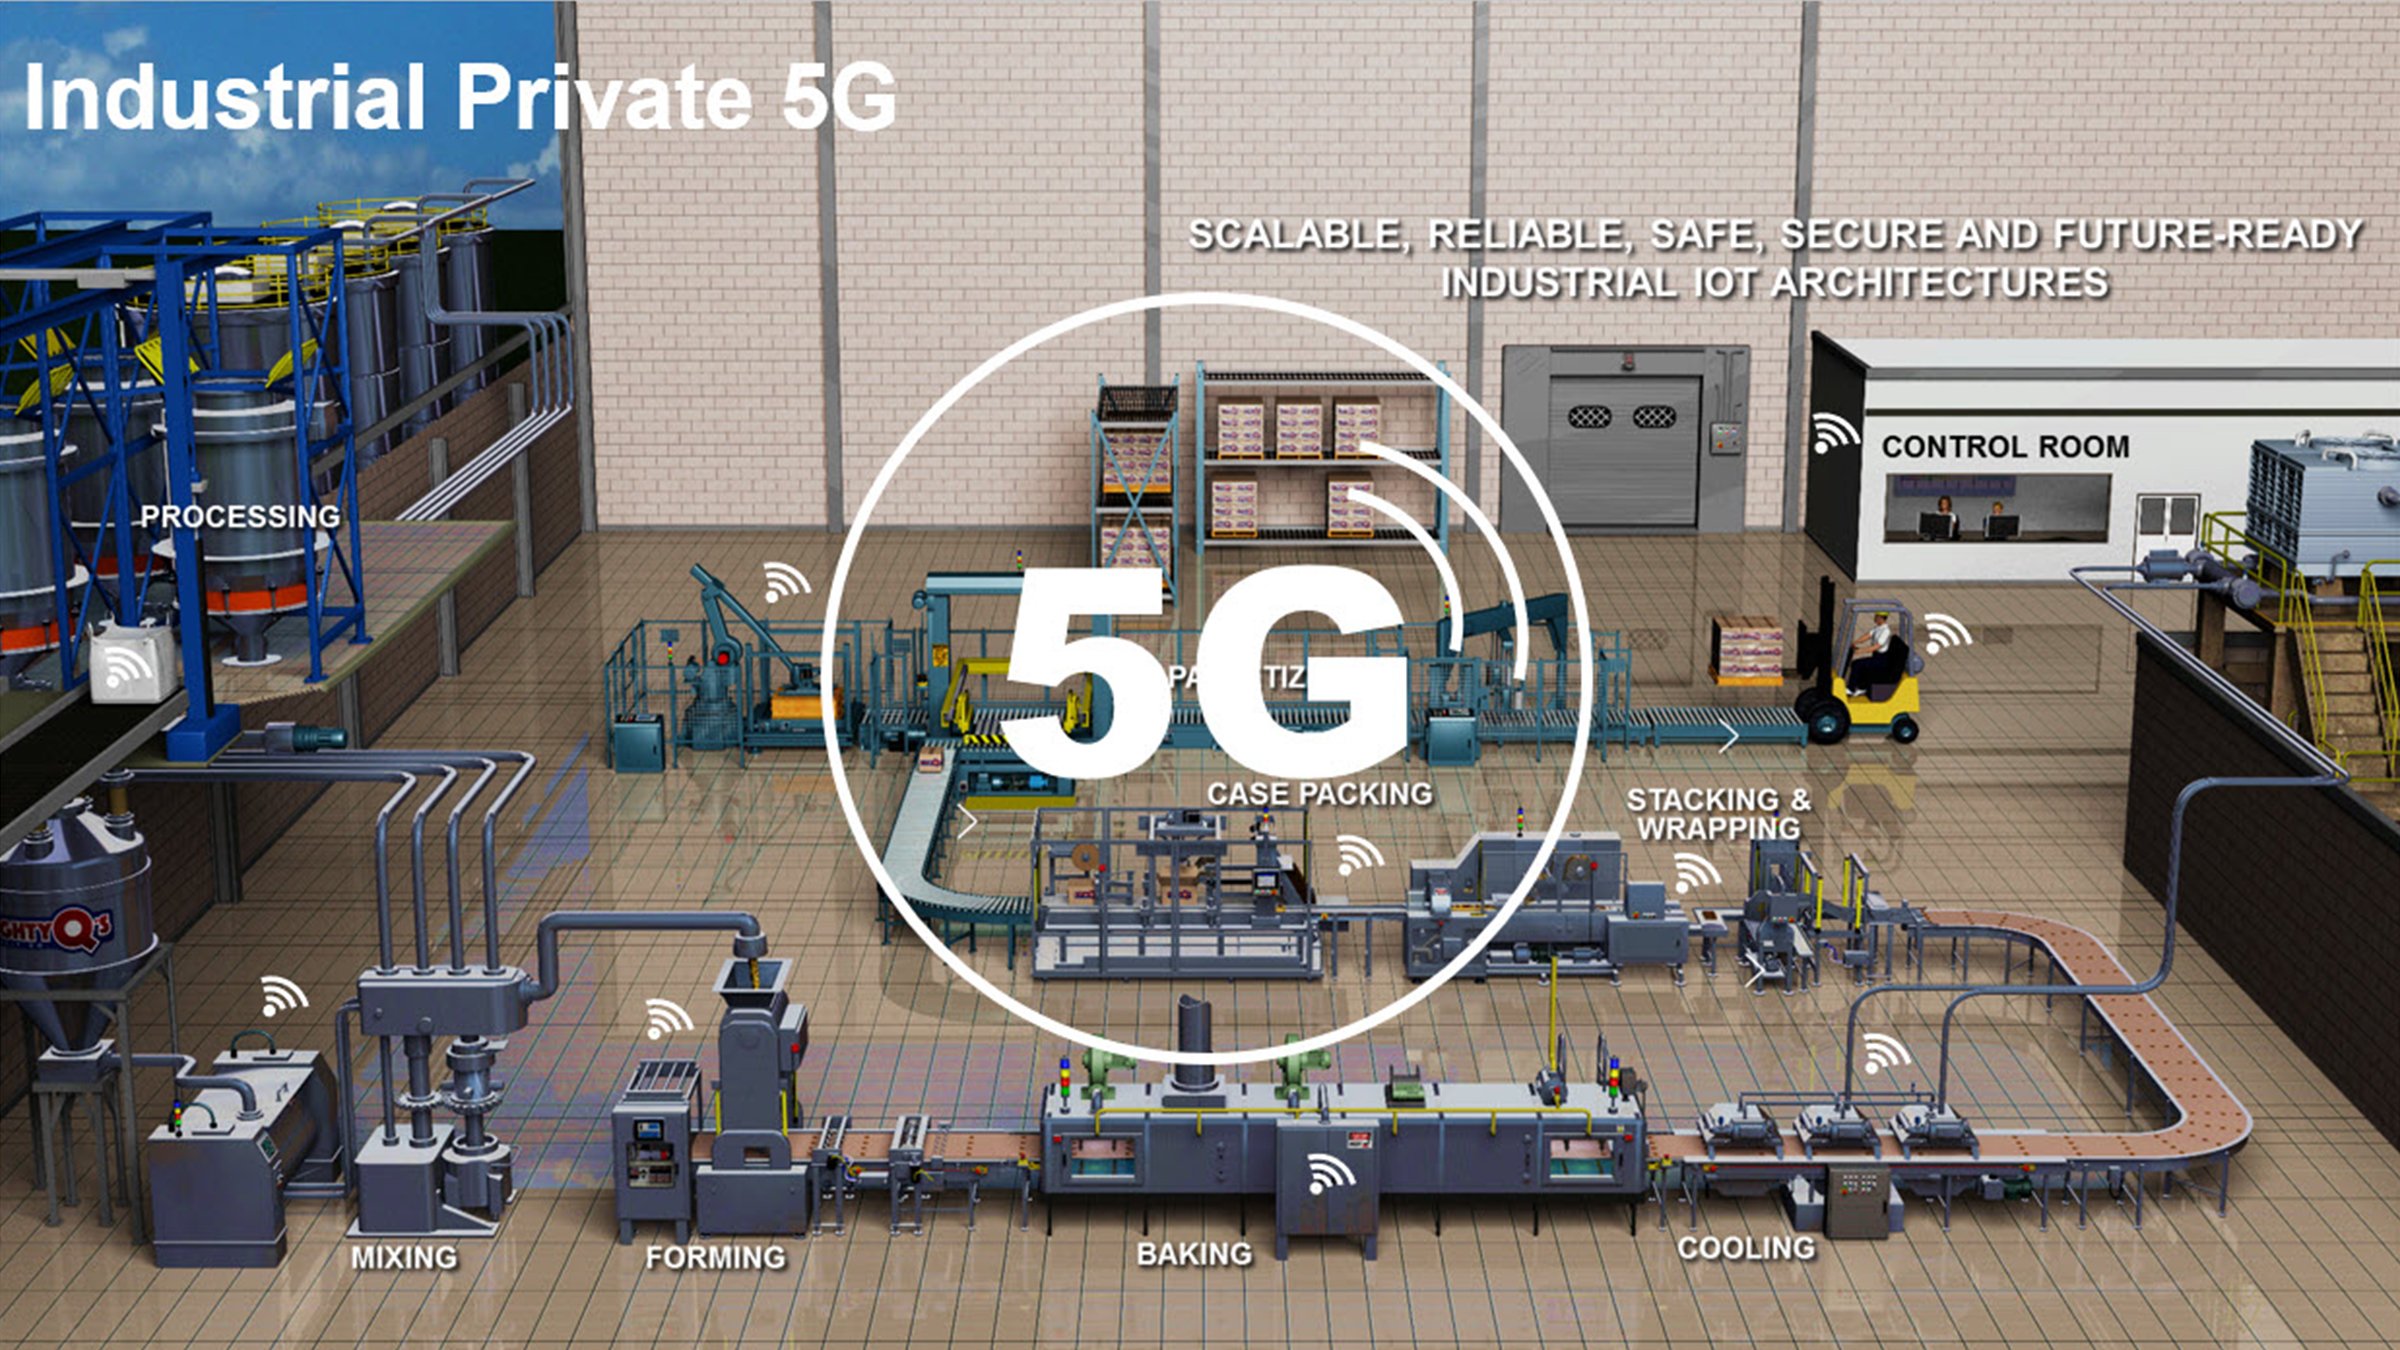 nfographic showing plant floor using private 5G in their Industrial IOT architecture